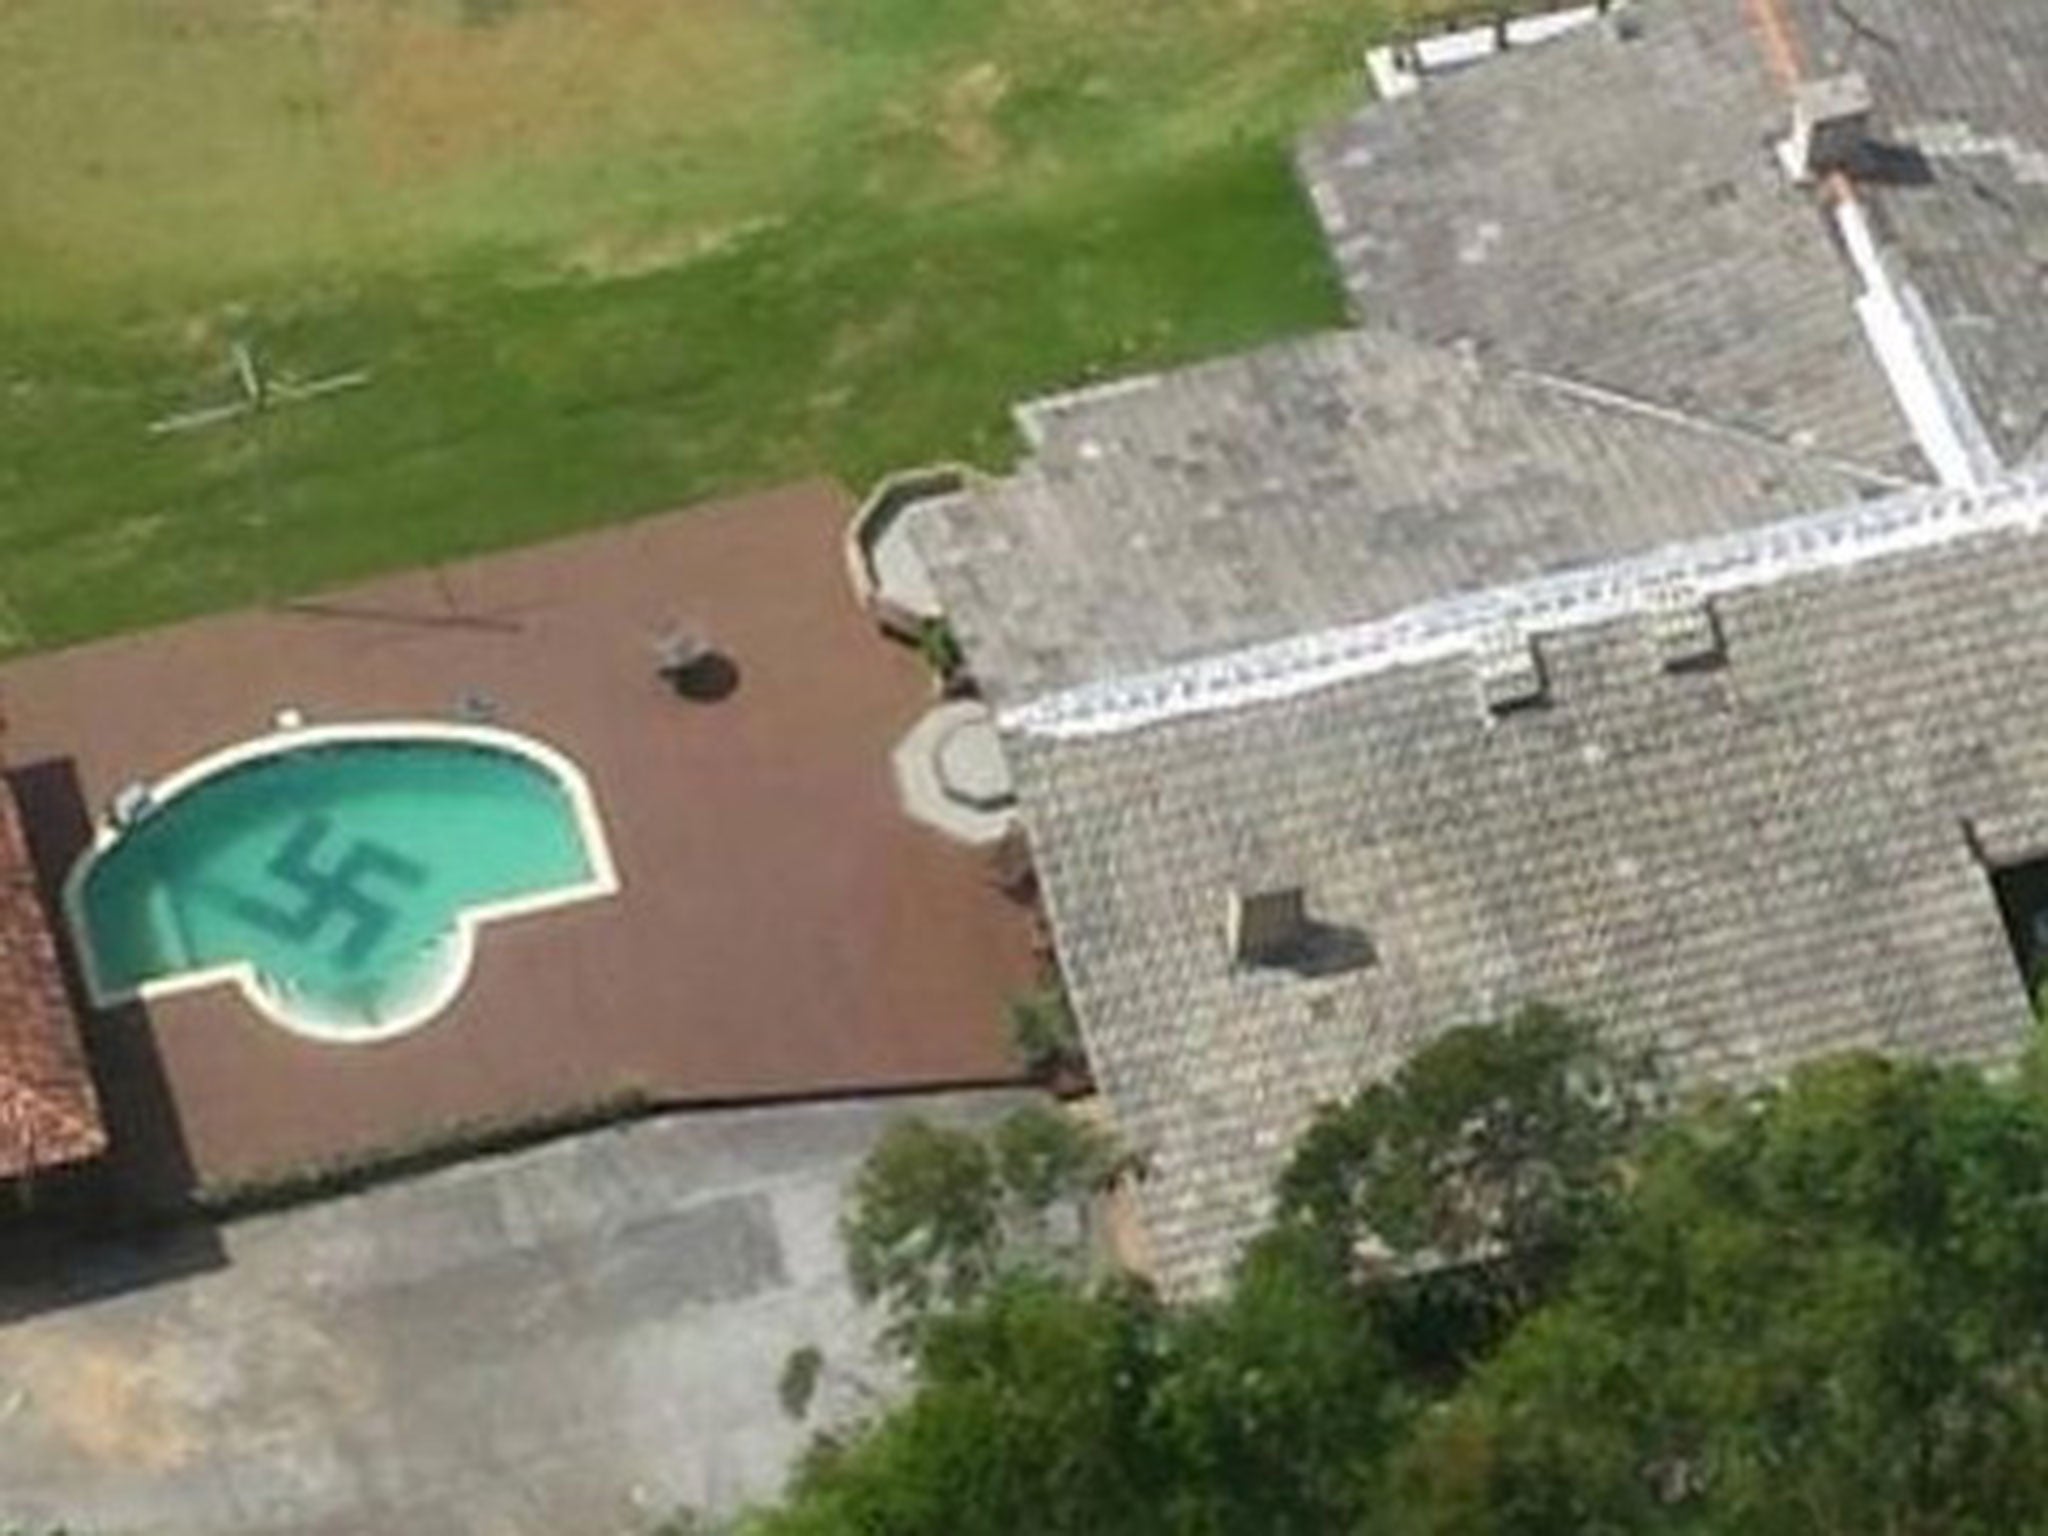 Police helicopter in Brazil spotted a huge swastika tiled into the bottom of a swimming pool